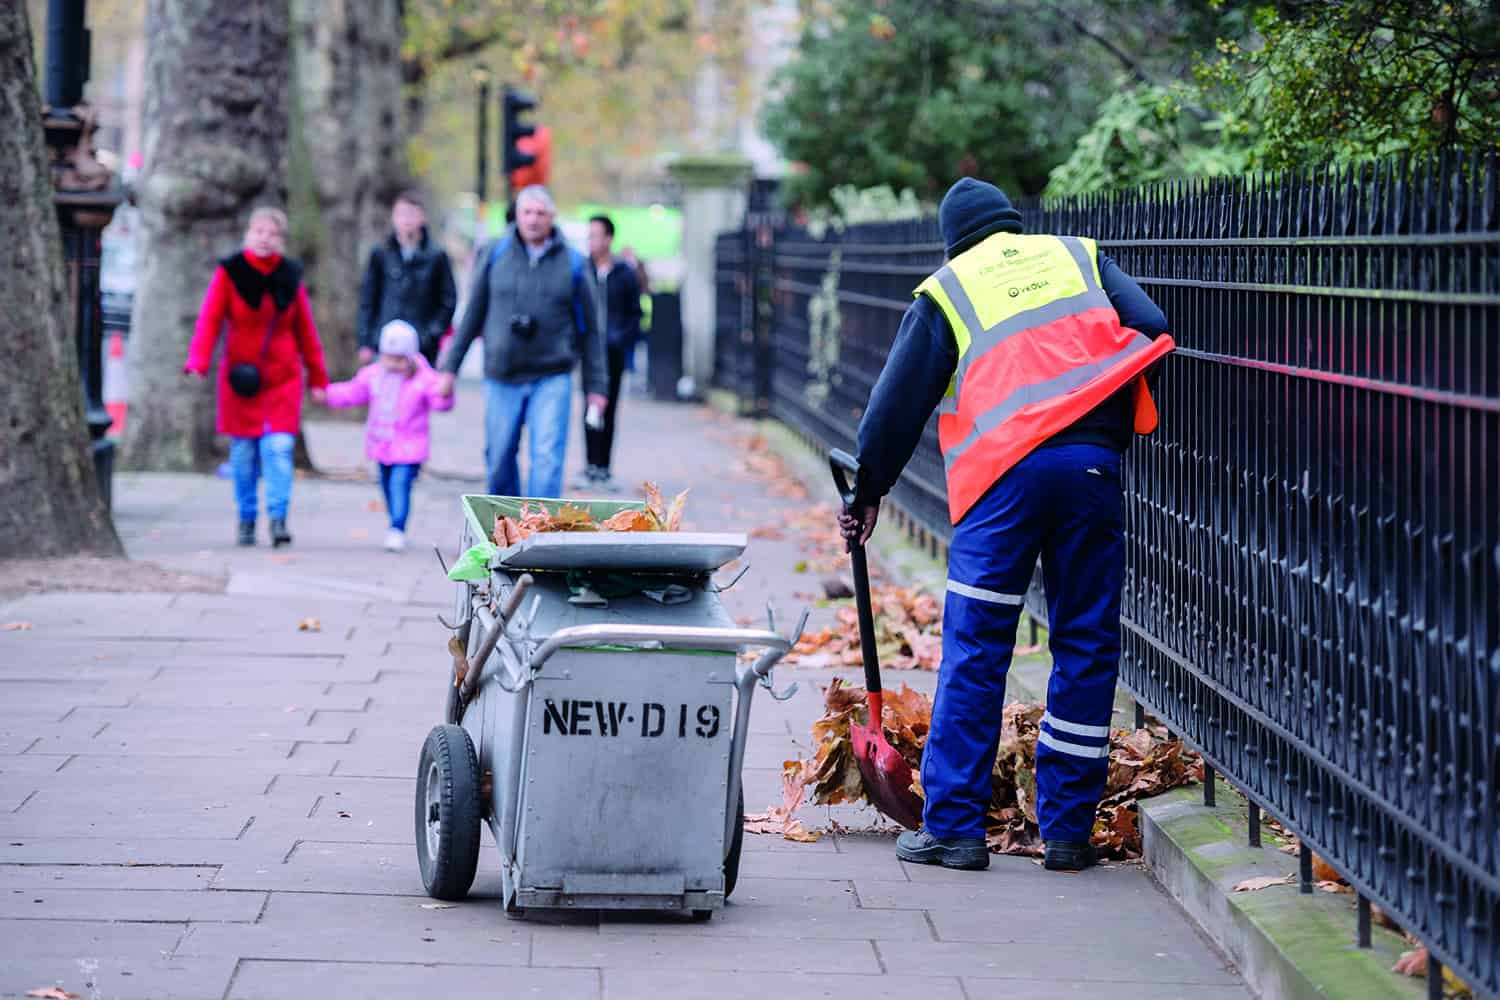 A council worker sweeping dead leaves off the street.